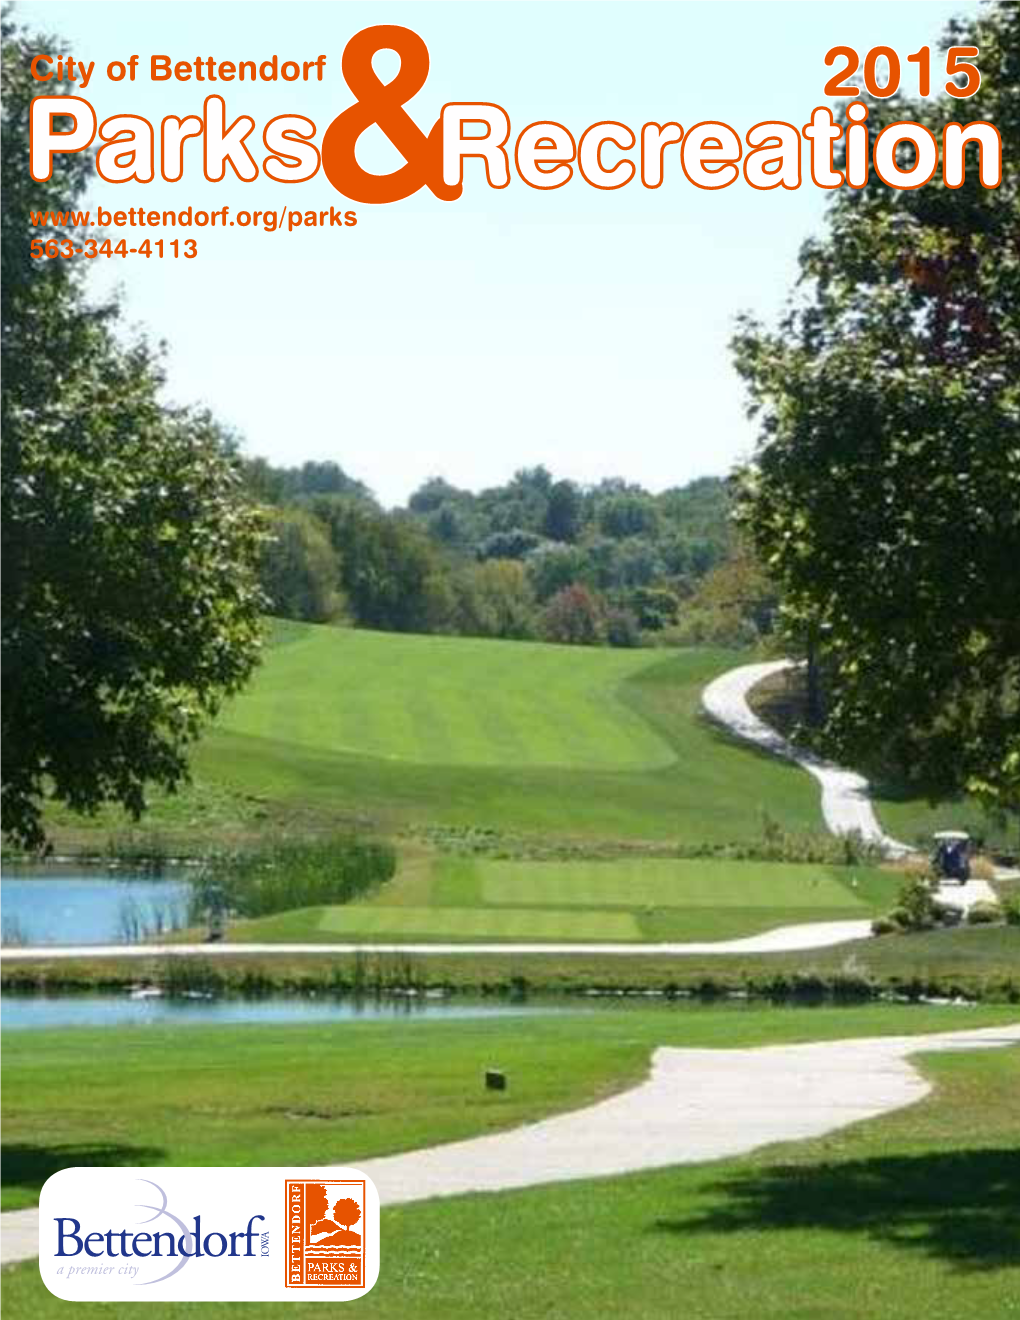 Parks Recreation 563-344-4113 MISSION STATEMENT to Provide Recreational Opportunities That Enrich the Quality of Life for All